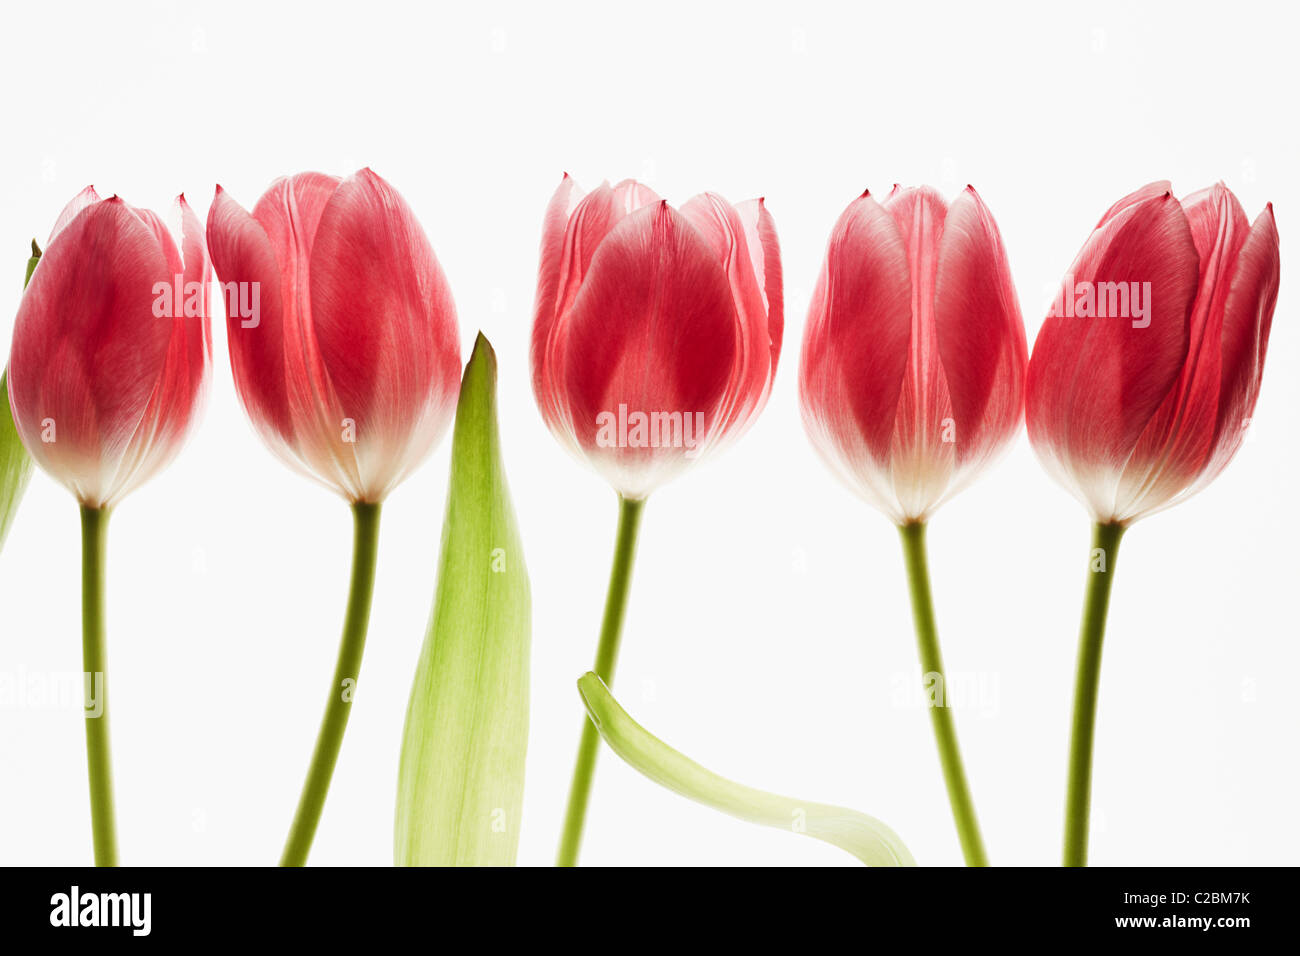 five red tulips on a white background Stock Photo